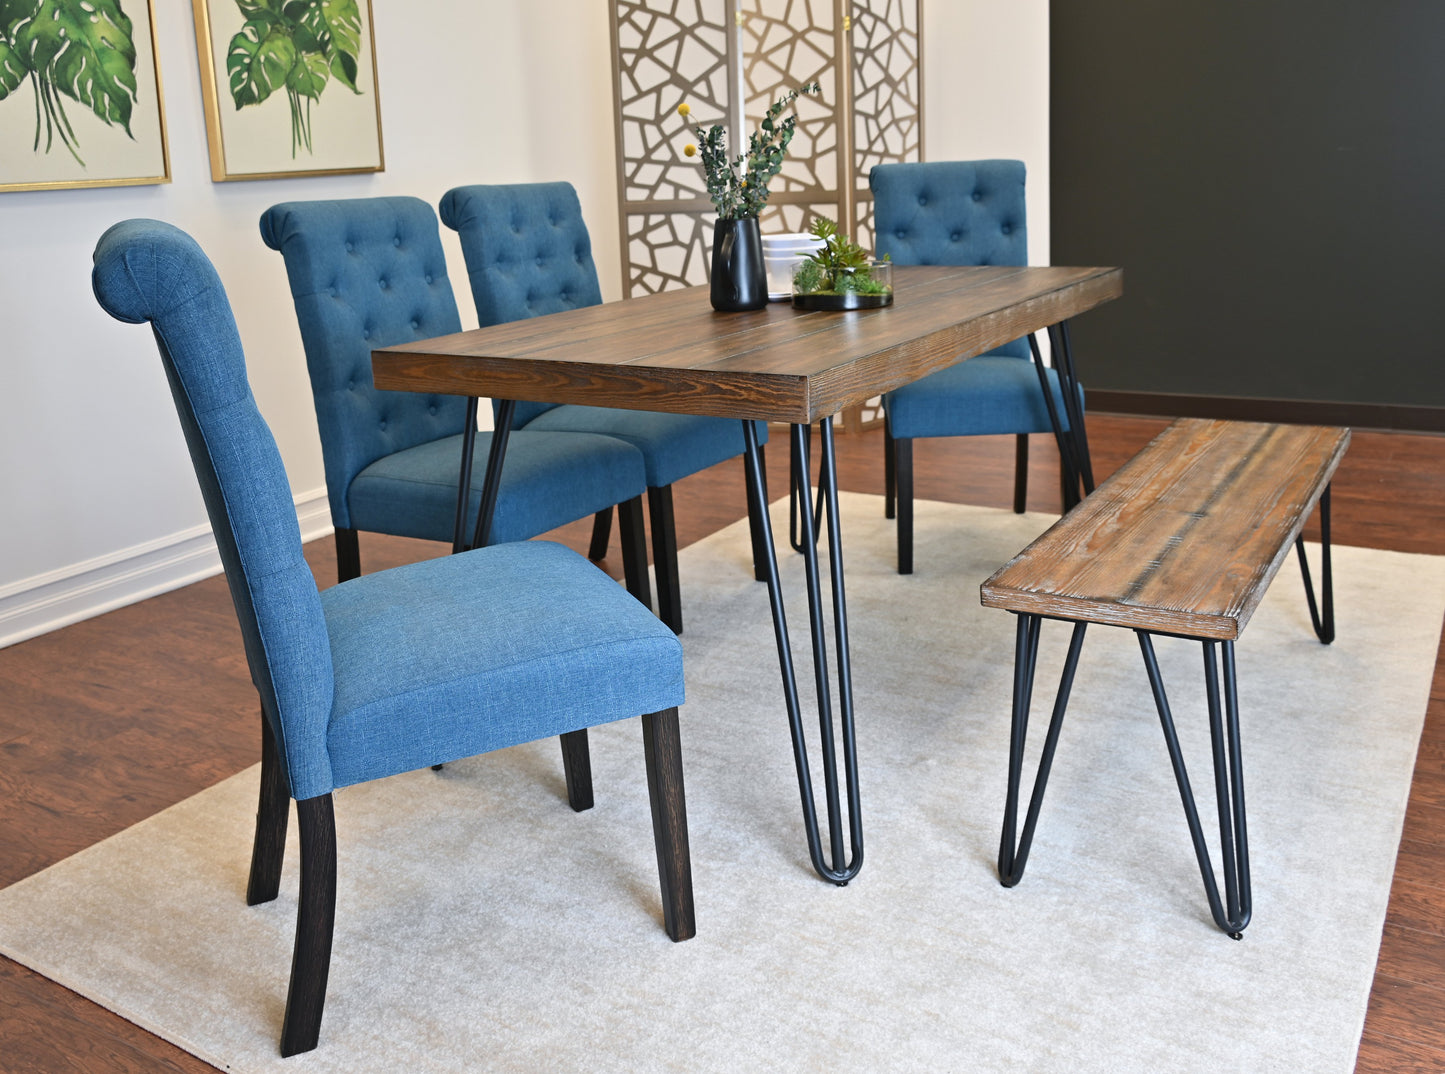 Ashford 6-Piece Dining Set, Hairpin Dining Table with 4 Chairs and Bench, 4 Color Options